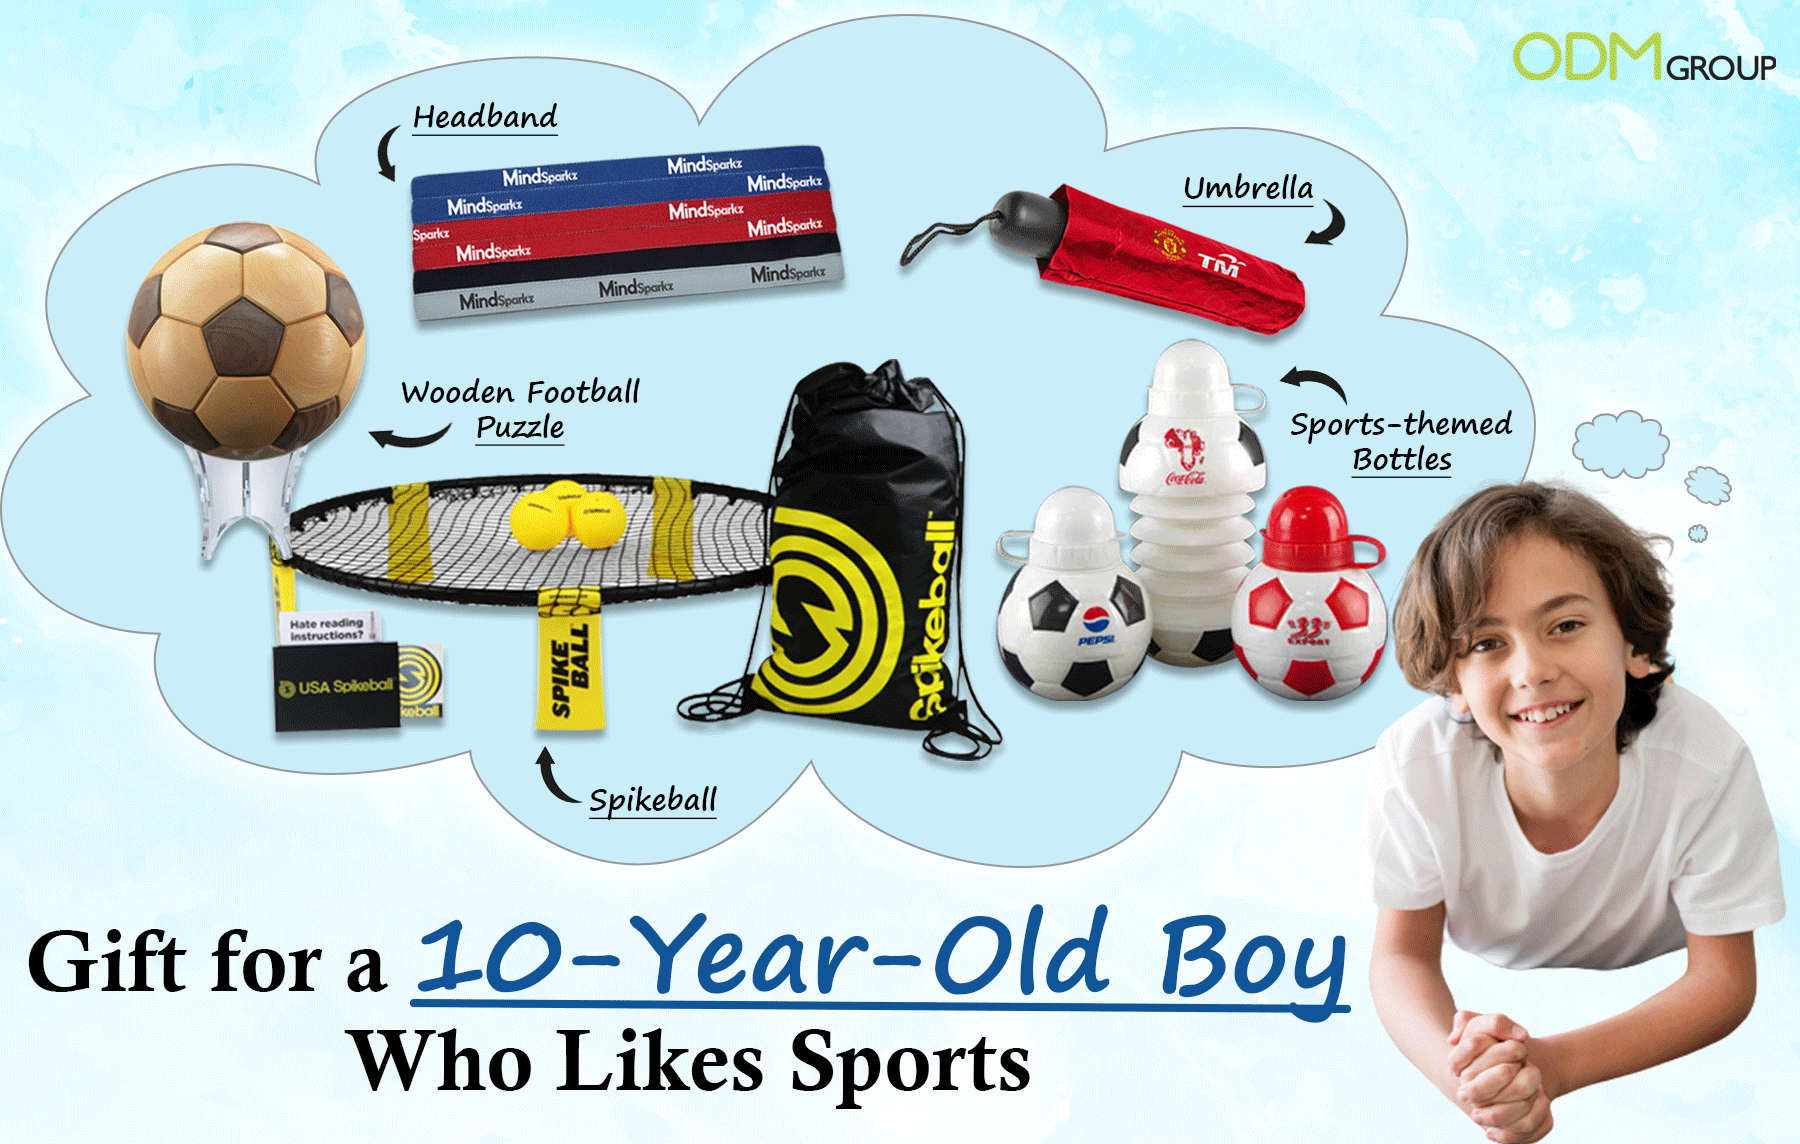 Gift for a 10 year old boy who likes sports